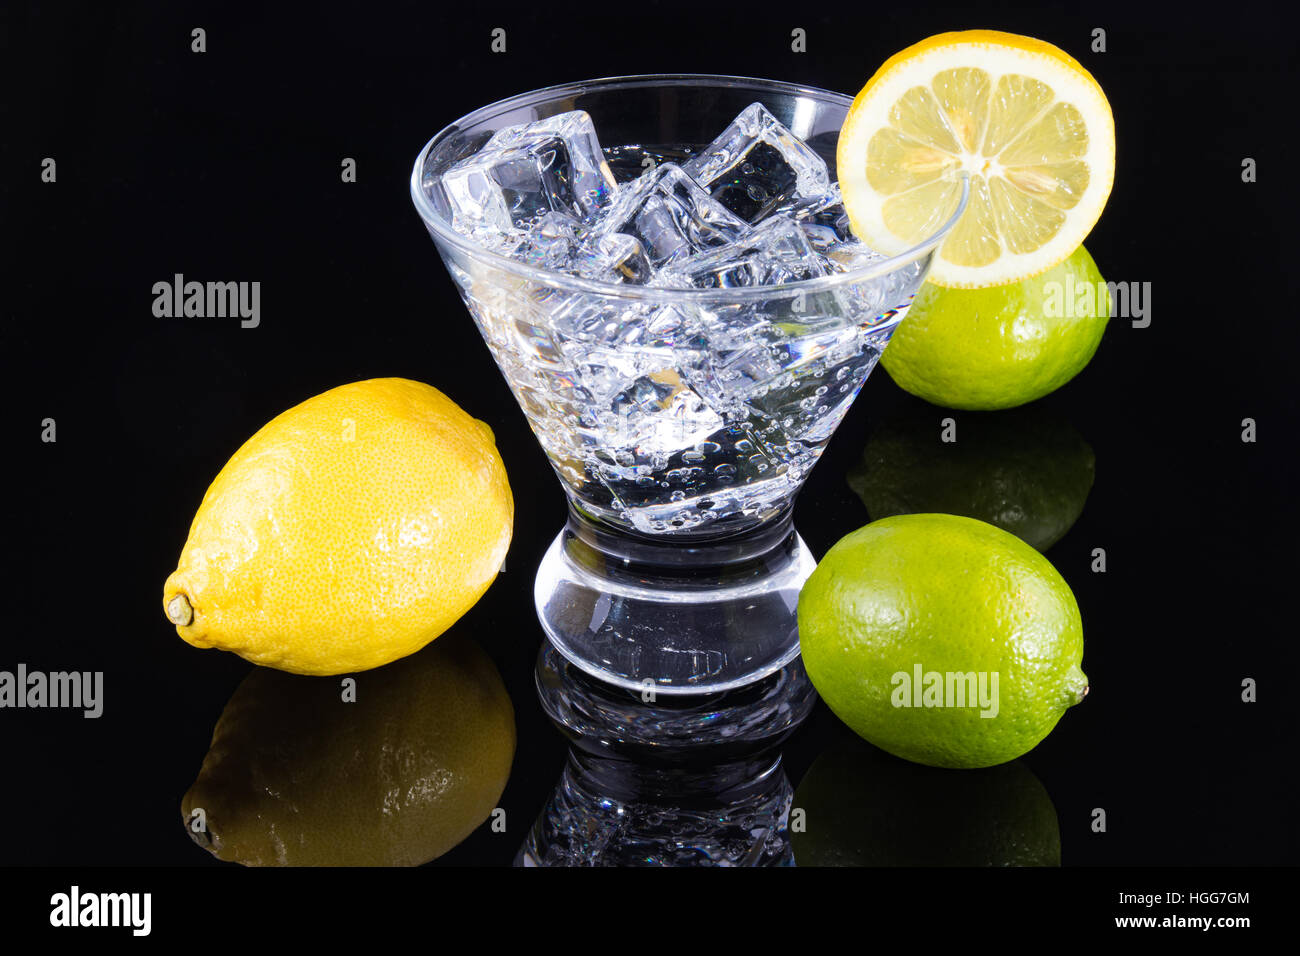 Sparkling beverage in a martini glass with lemons and limes on a black background Stock Photo